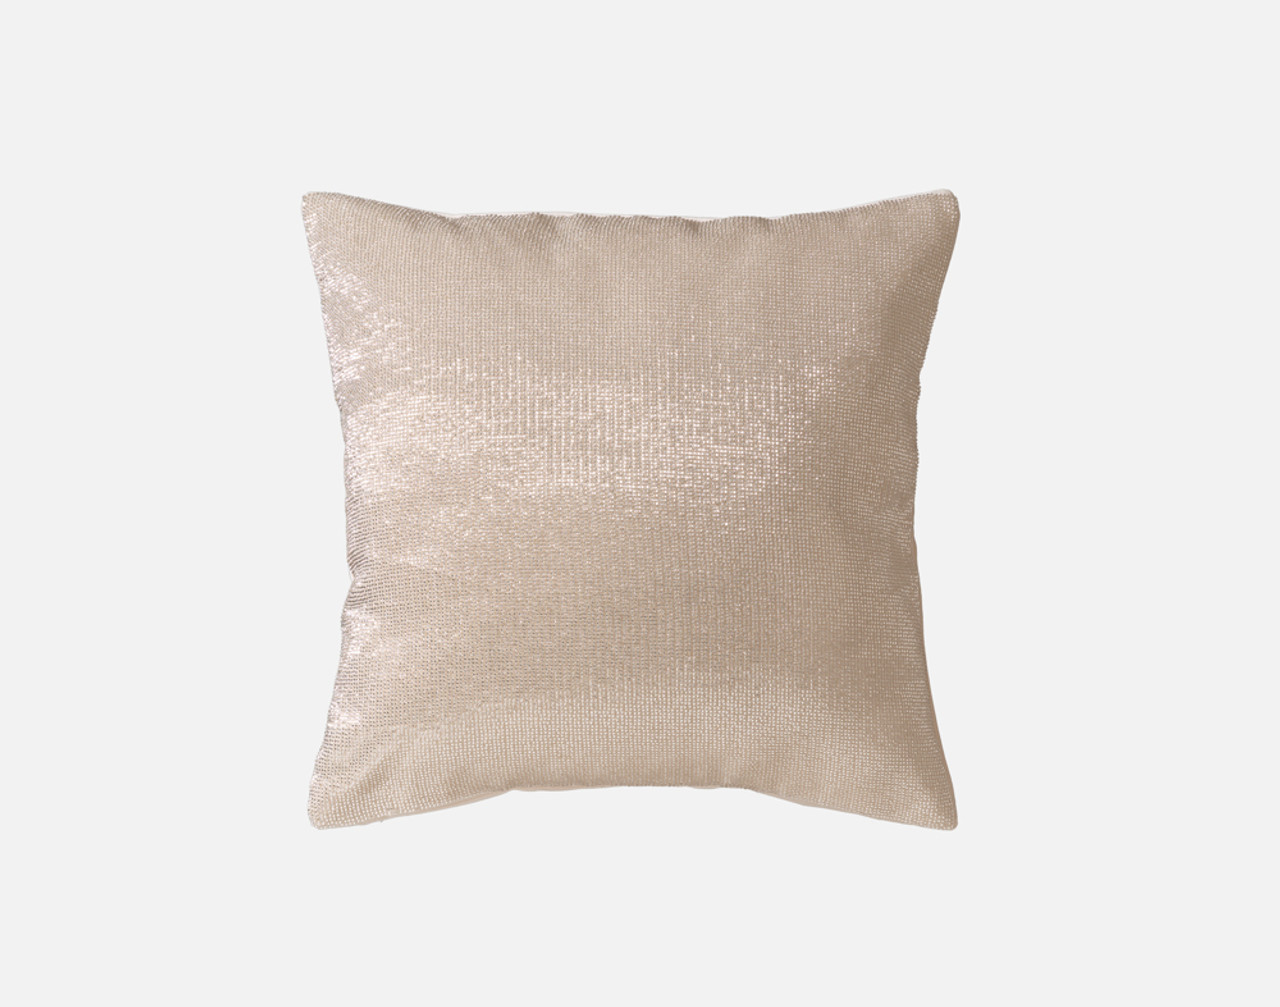 Front view of our Beaded Square Cushion Cover in Champagne resting against a solid white background.